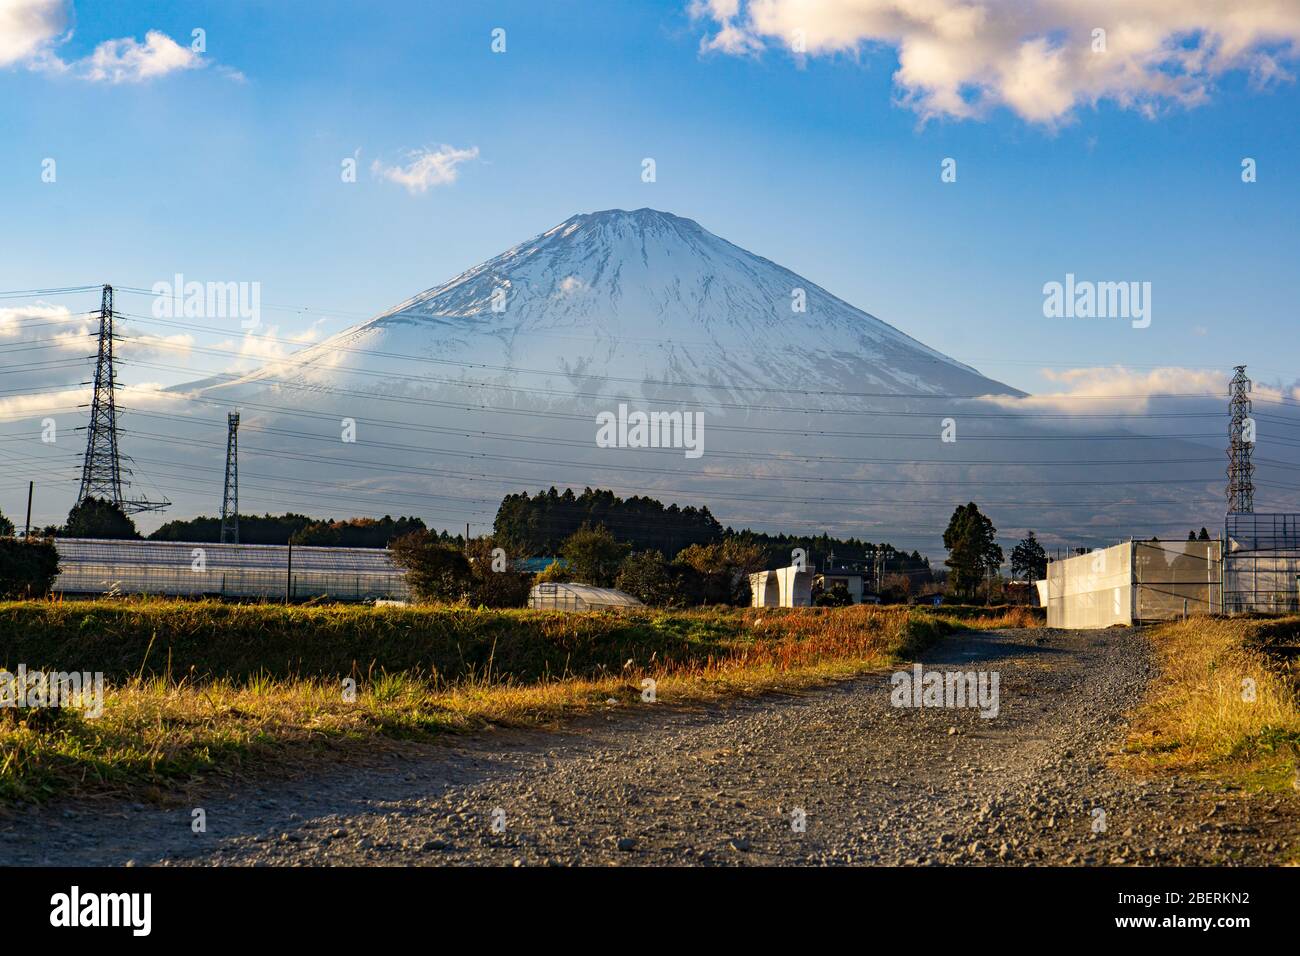 Mount Fuji also knows as Fujiyama or Fujisan, the highest mountain in Japan, is an active volcano. Commands an area surrounded by plenty of scenic spo Stock Photo